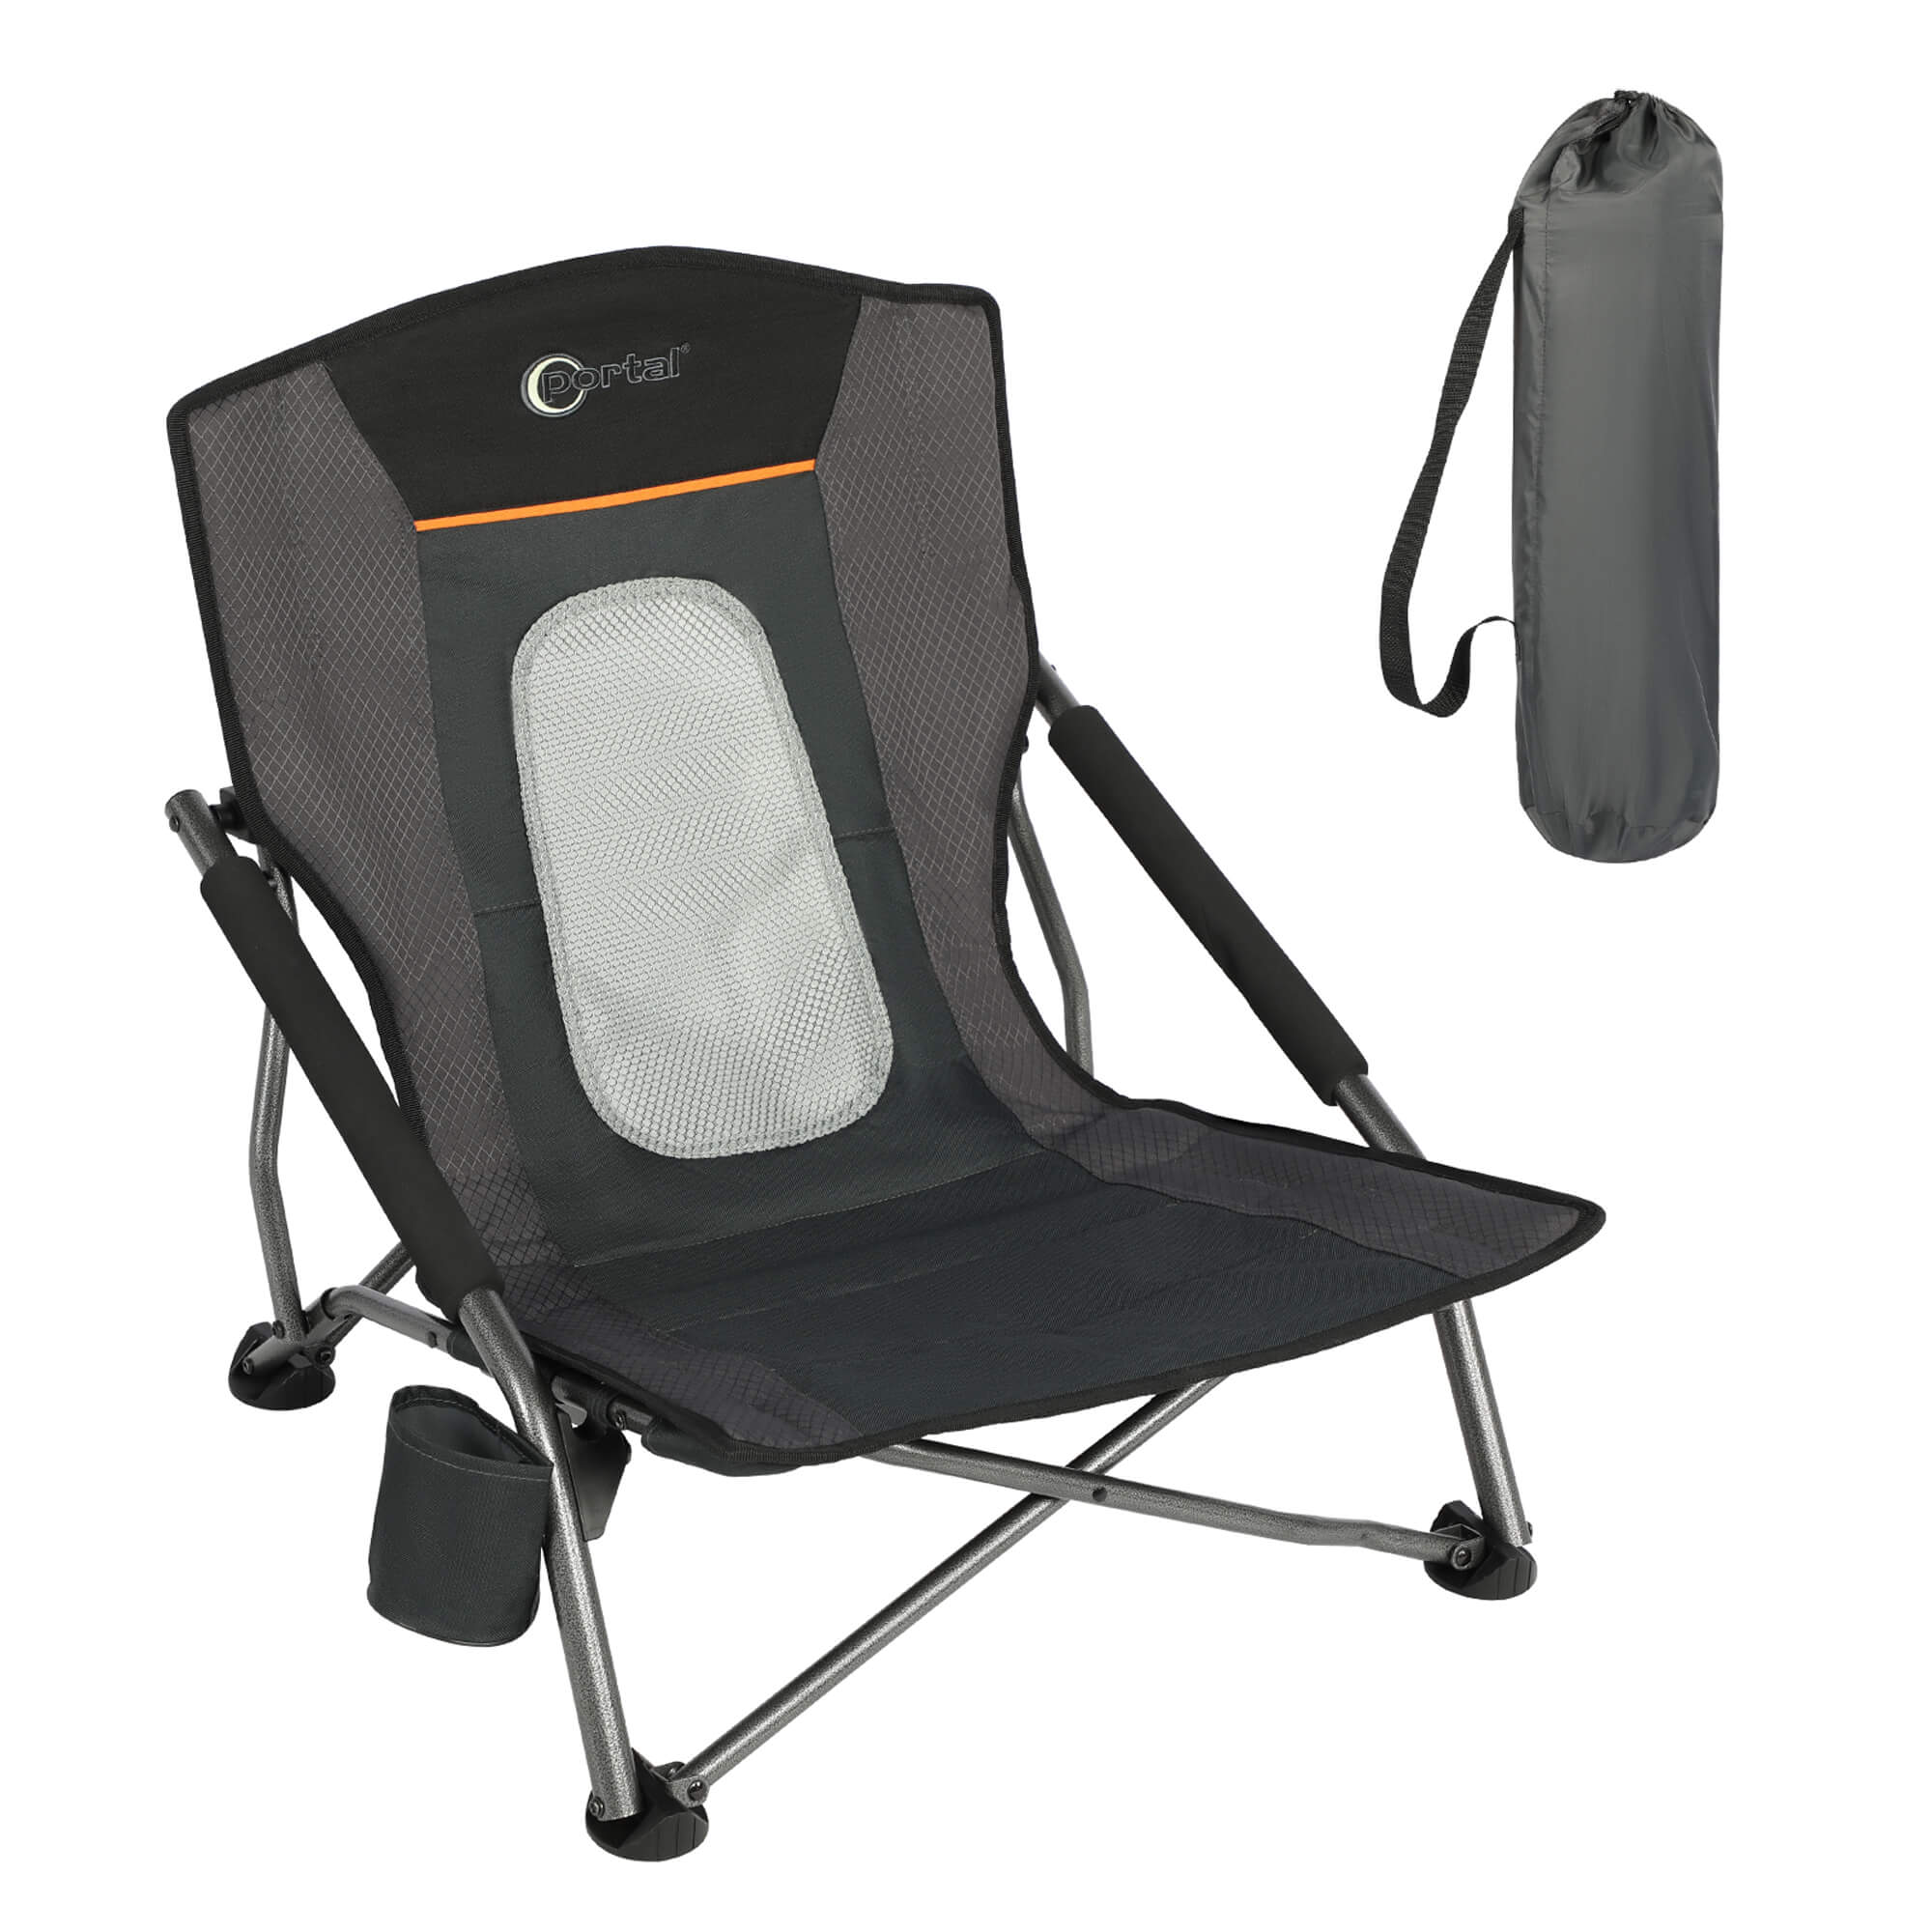 Portal Low Beach Camp Chair Folding Compact Picnic Concert Festival Chair with Carry Bag